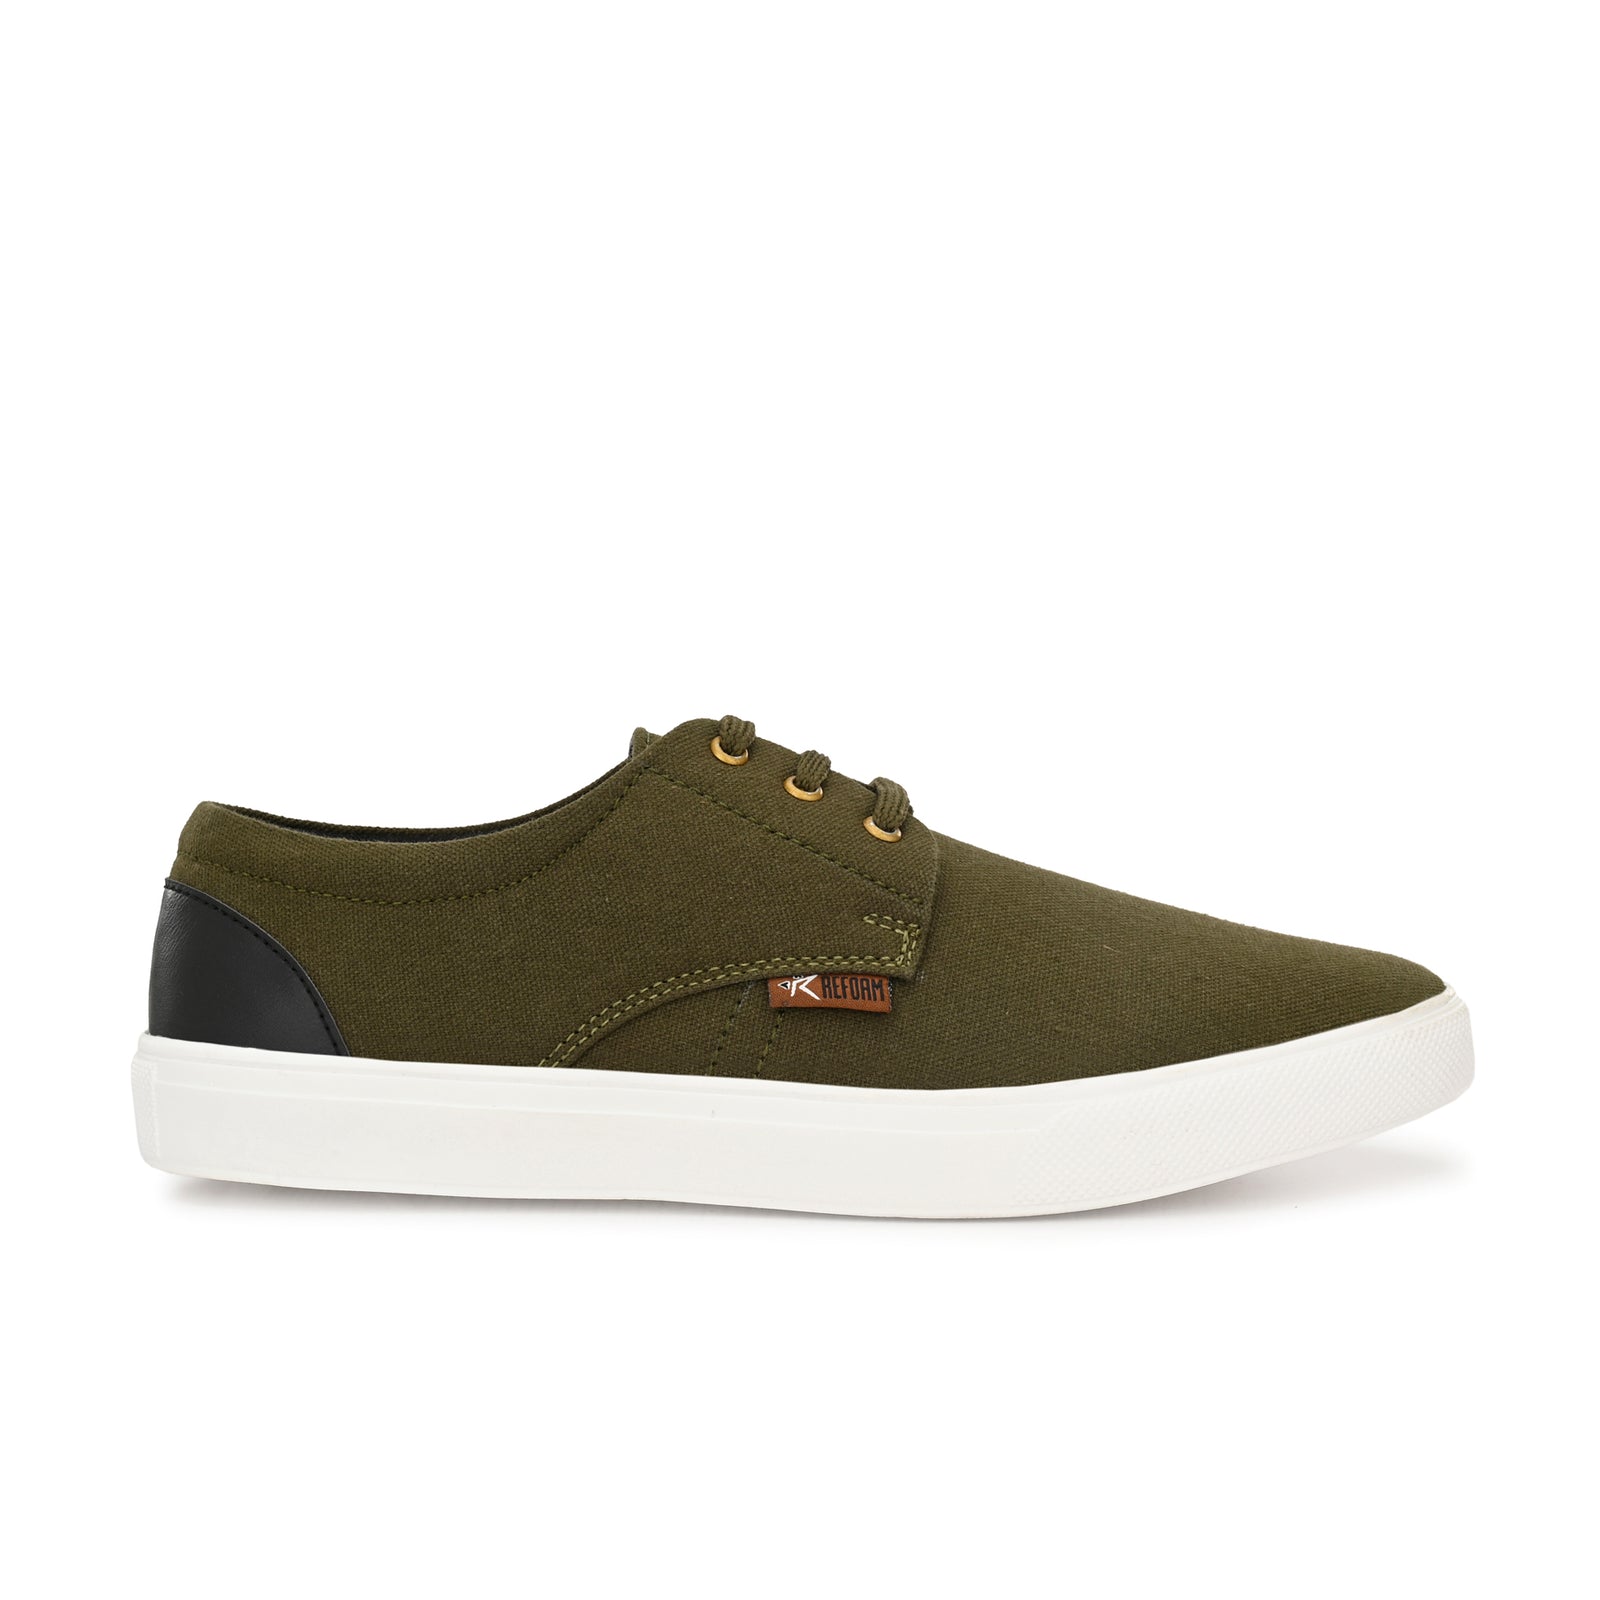 Olive Solid Canvas Lace Up Lifestyle Casual Shoes For Men